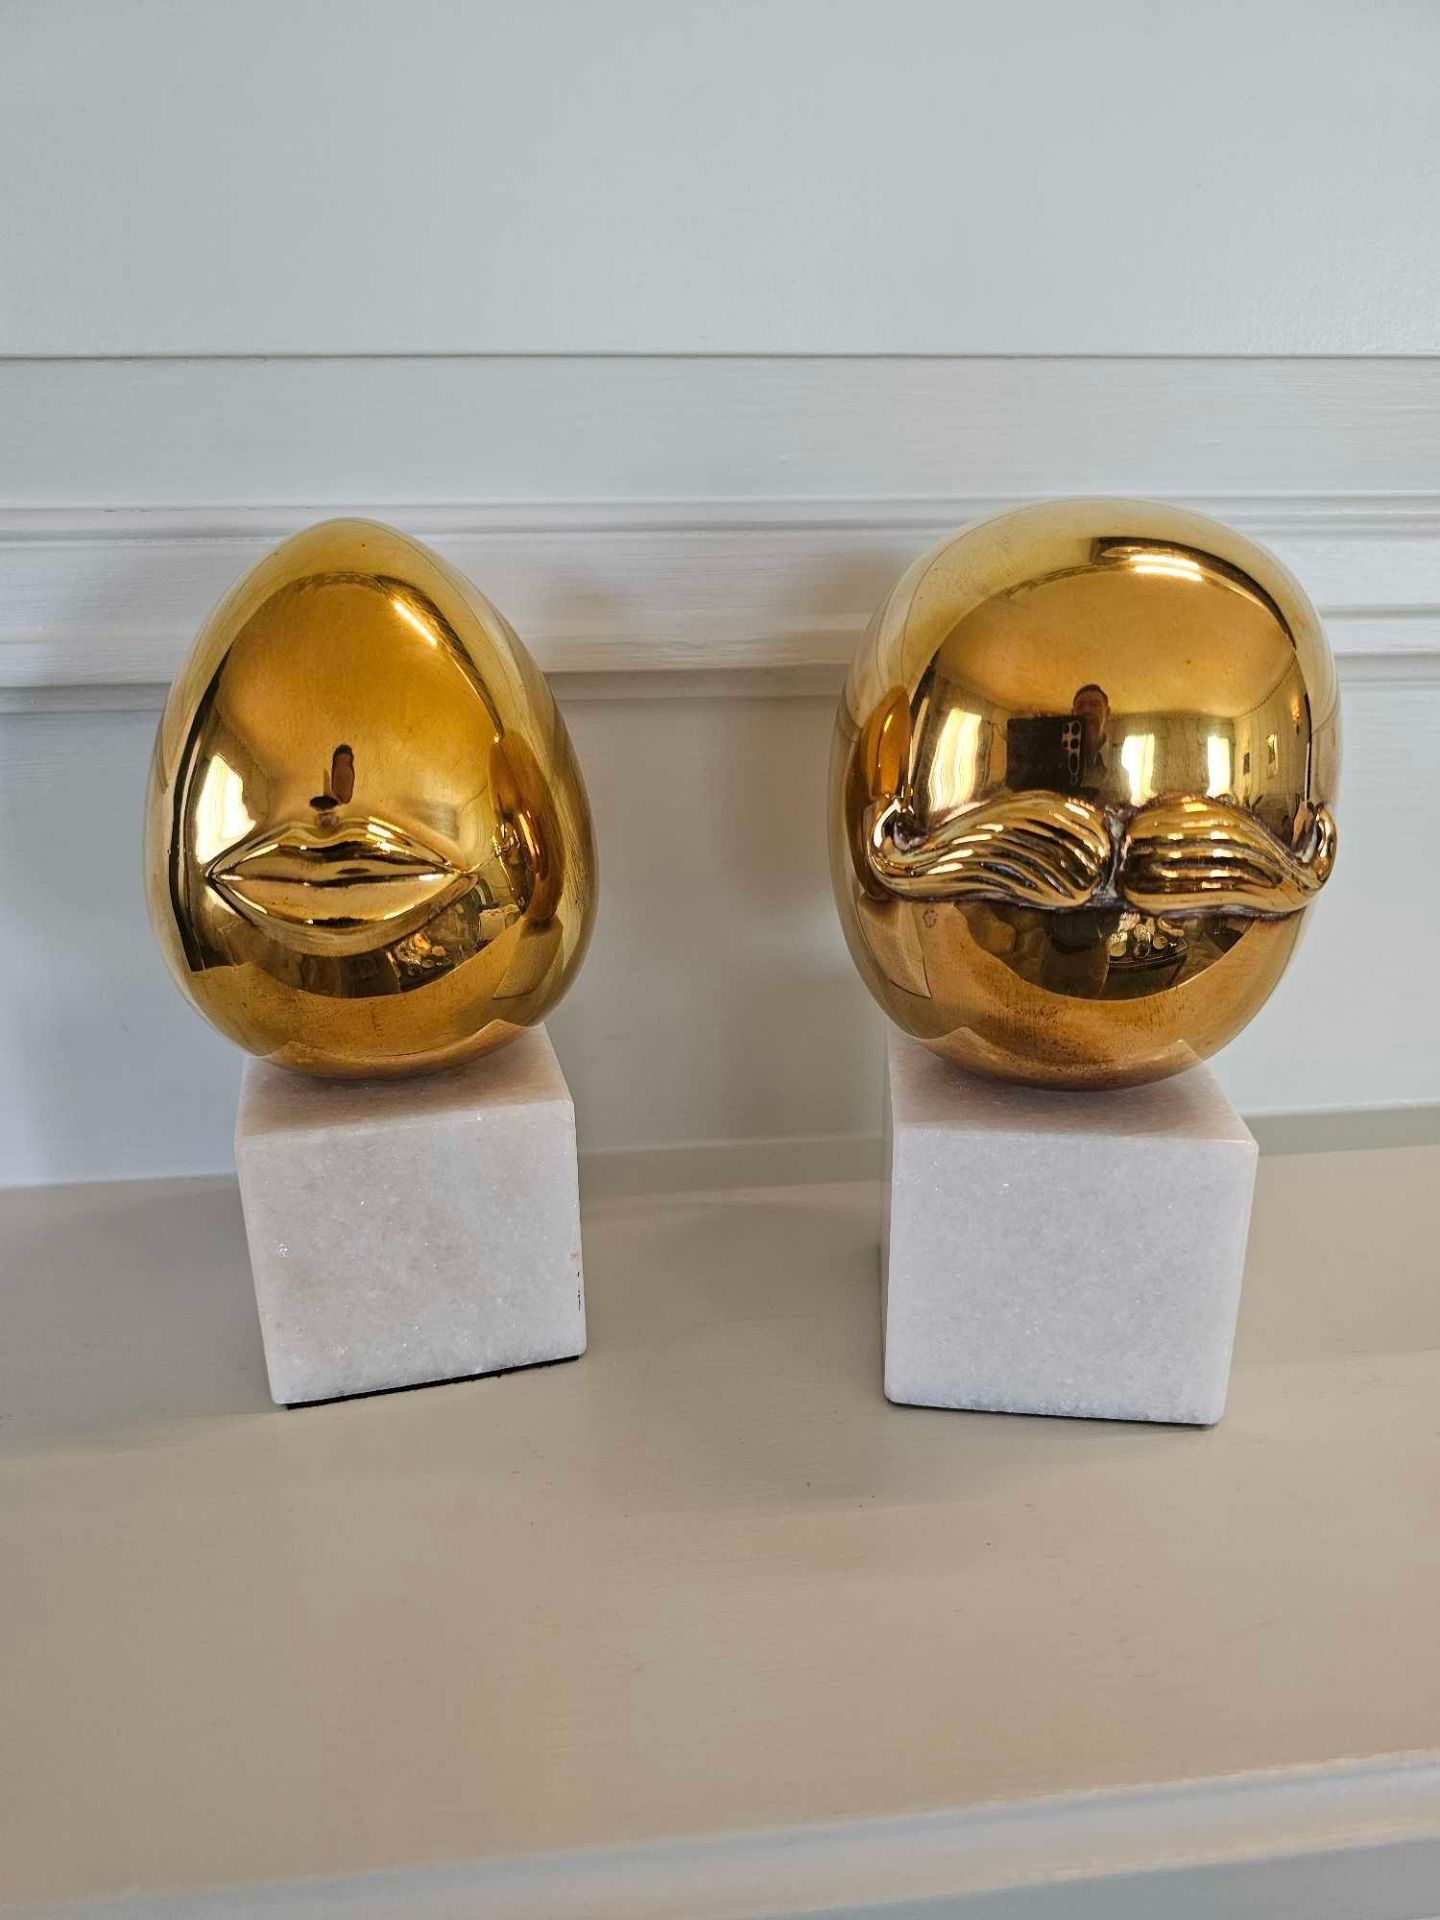 Jonathan Adler Brass Misia Sculpture Hand Sculpted In The Designers Soho Studio Then Sand Cast In - Image 2 of 3